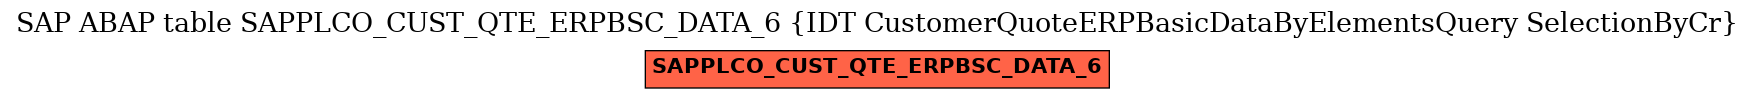 E-R Diagram for table SAPPLCO_CUST_QTE_ERPBSC_DATA_6 (IDT CustomerQuoteERPBasicDataByElementsQuery SelectionByCr)